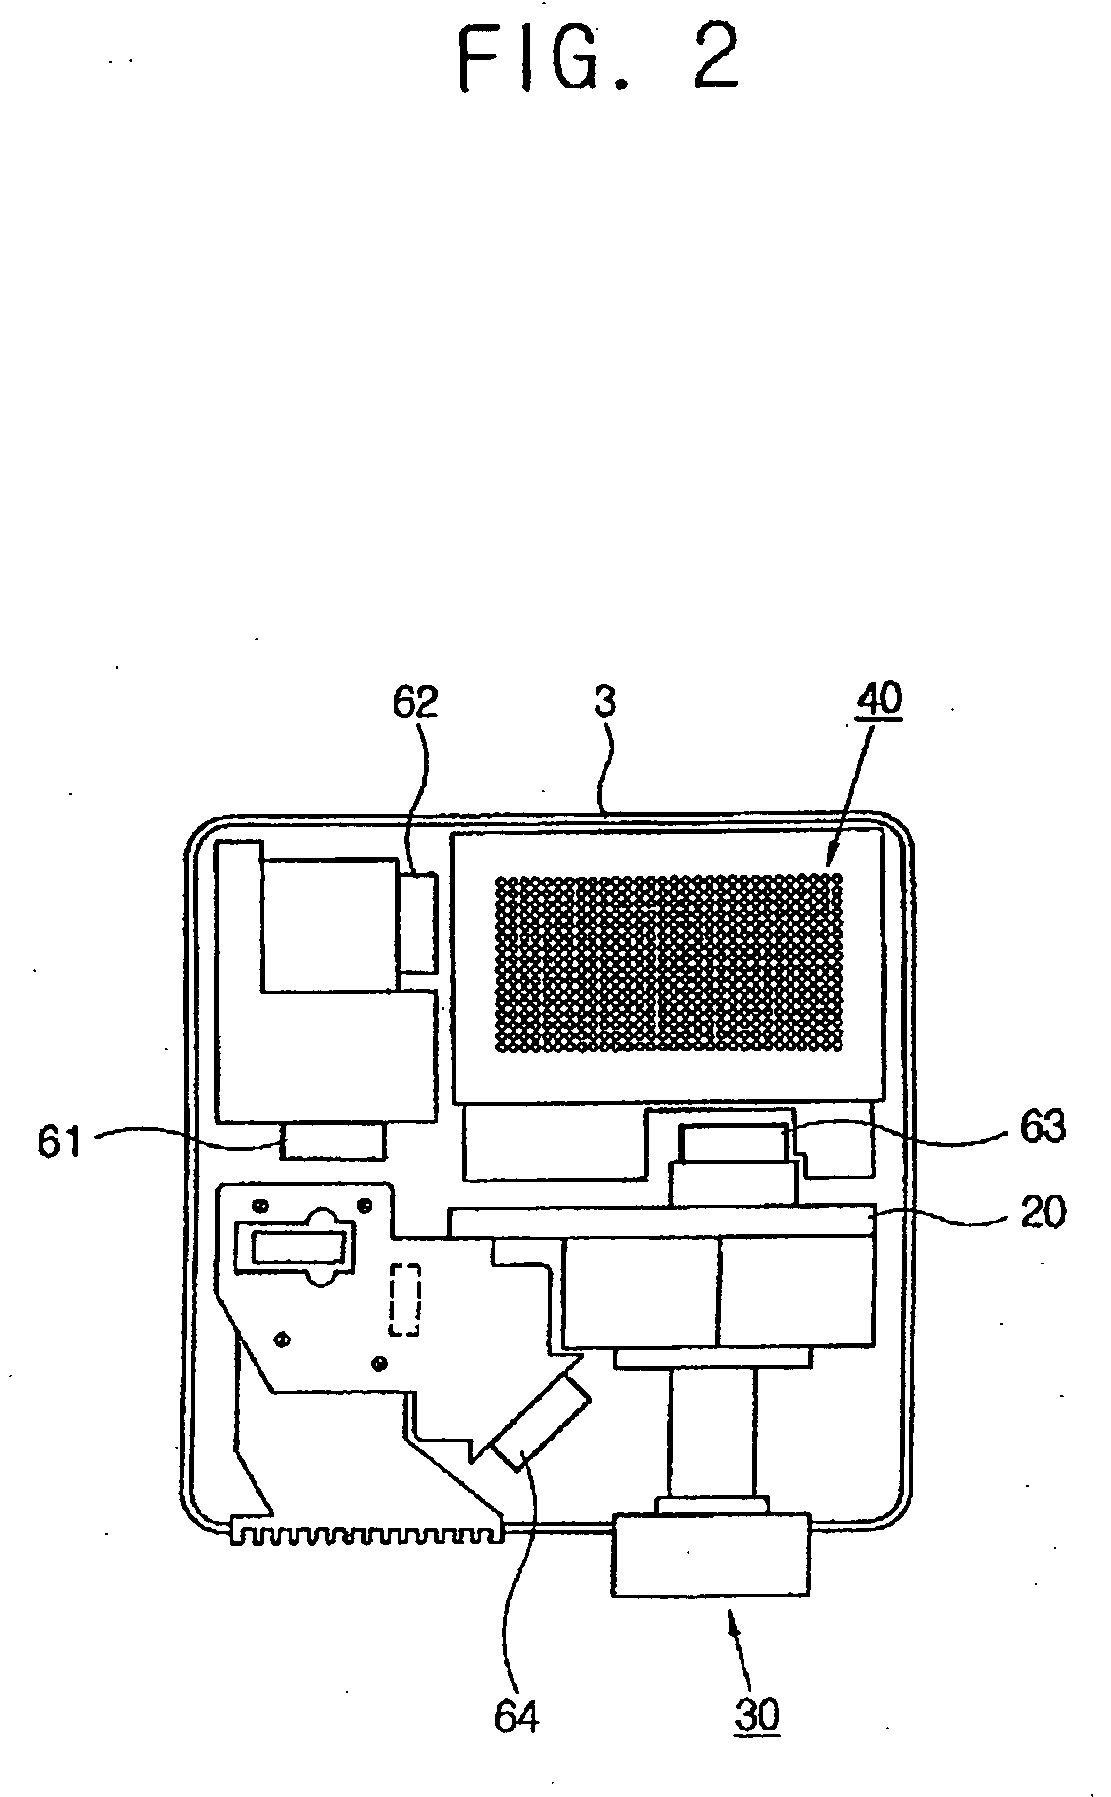 Image projecting apparatus